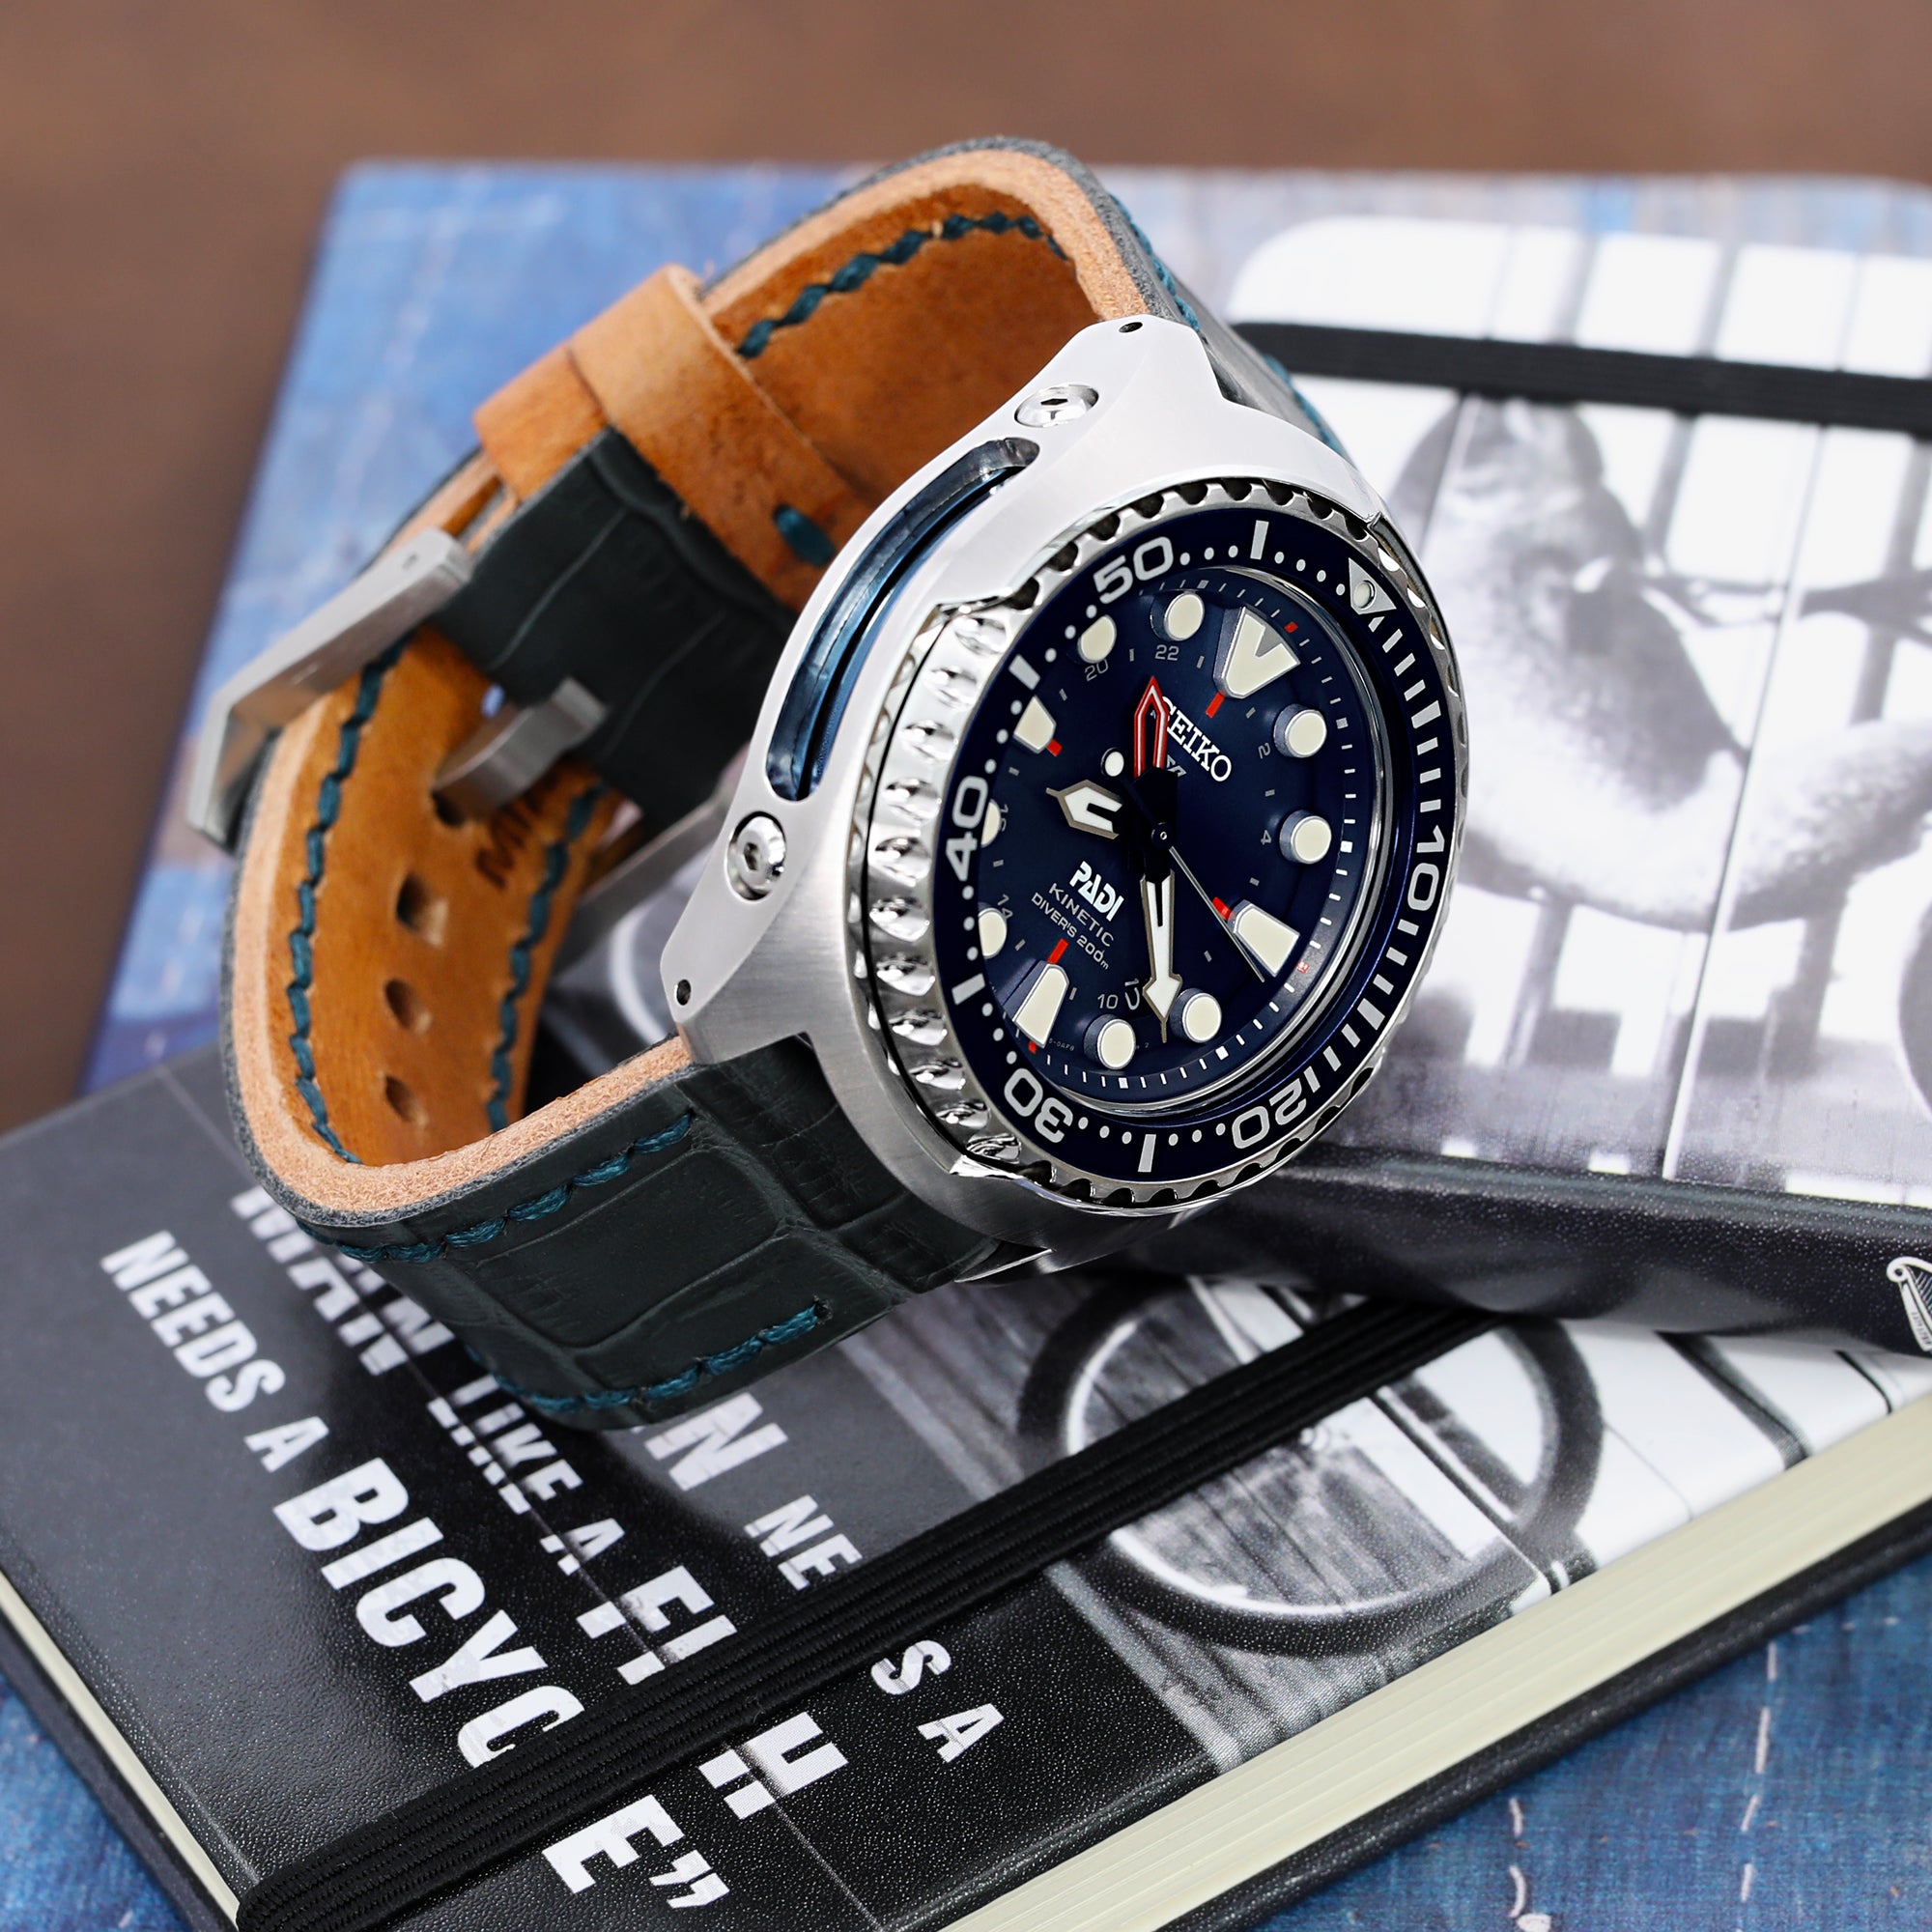 Seiko Prospex Special Edition PADI Kinetic GMT Diver SUN065 24mm leather watch strap